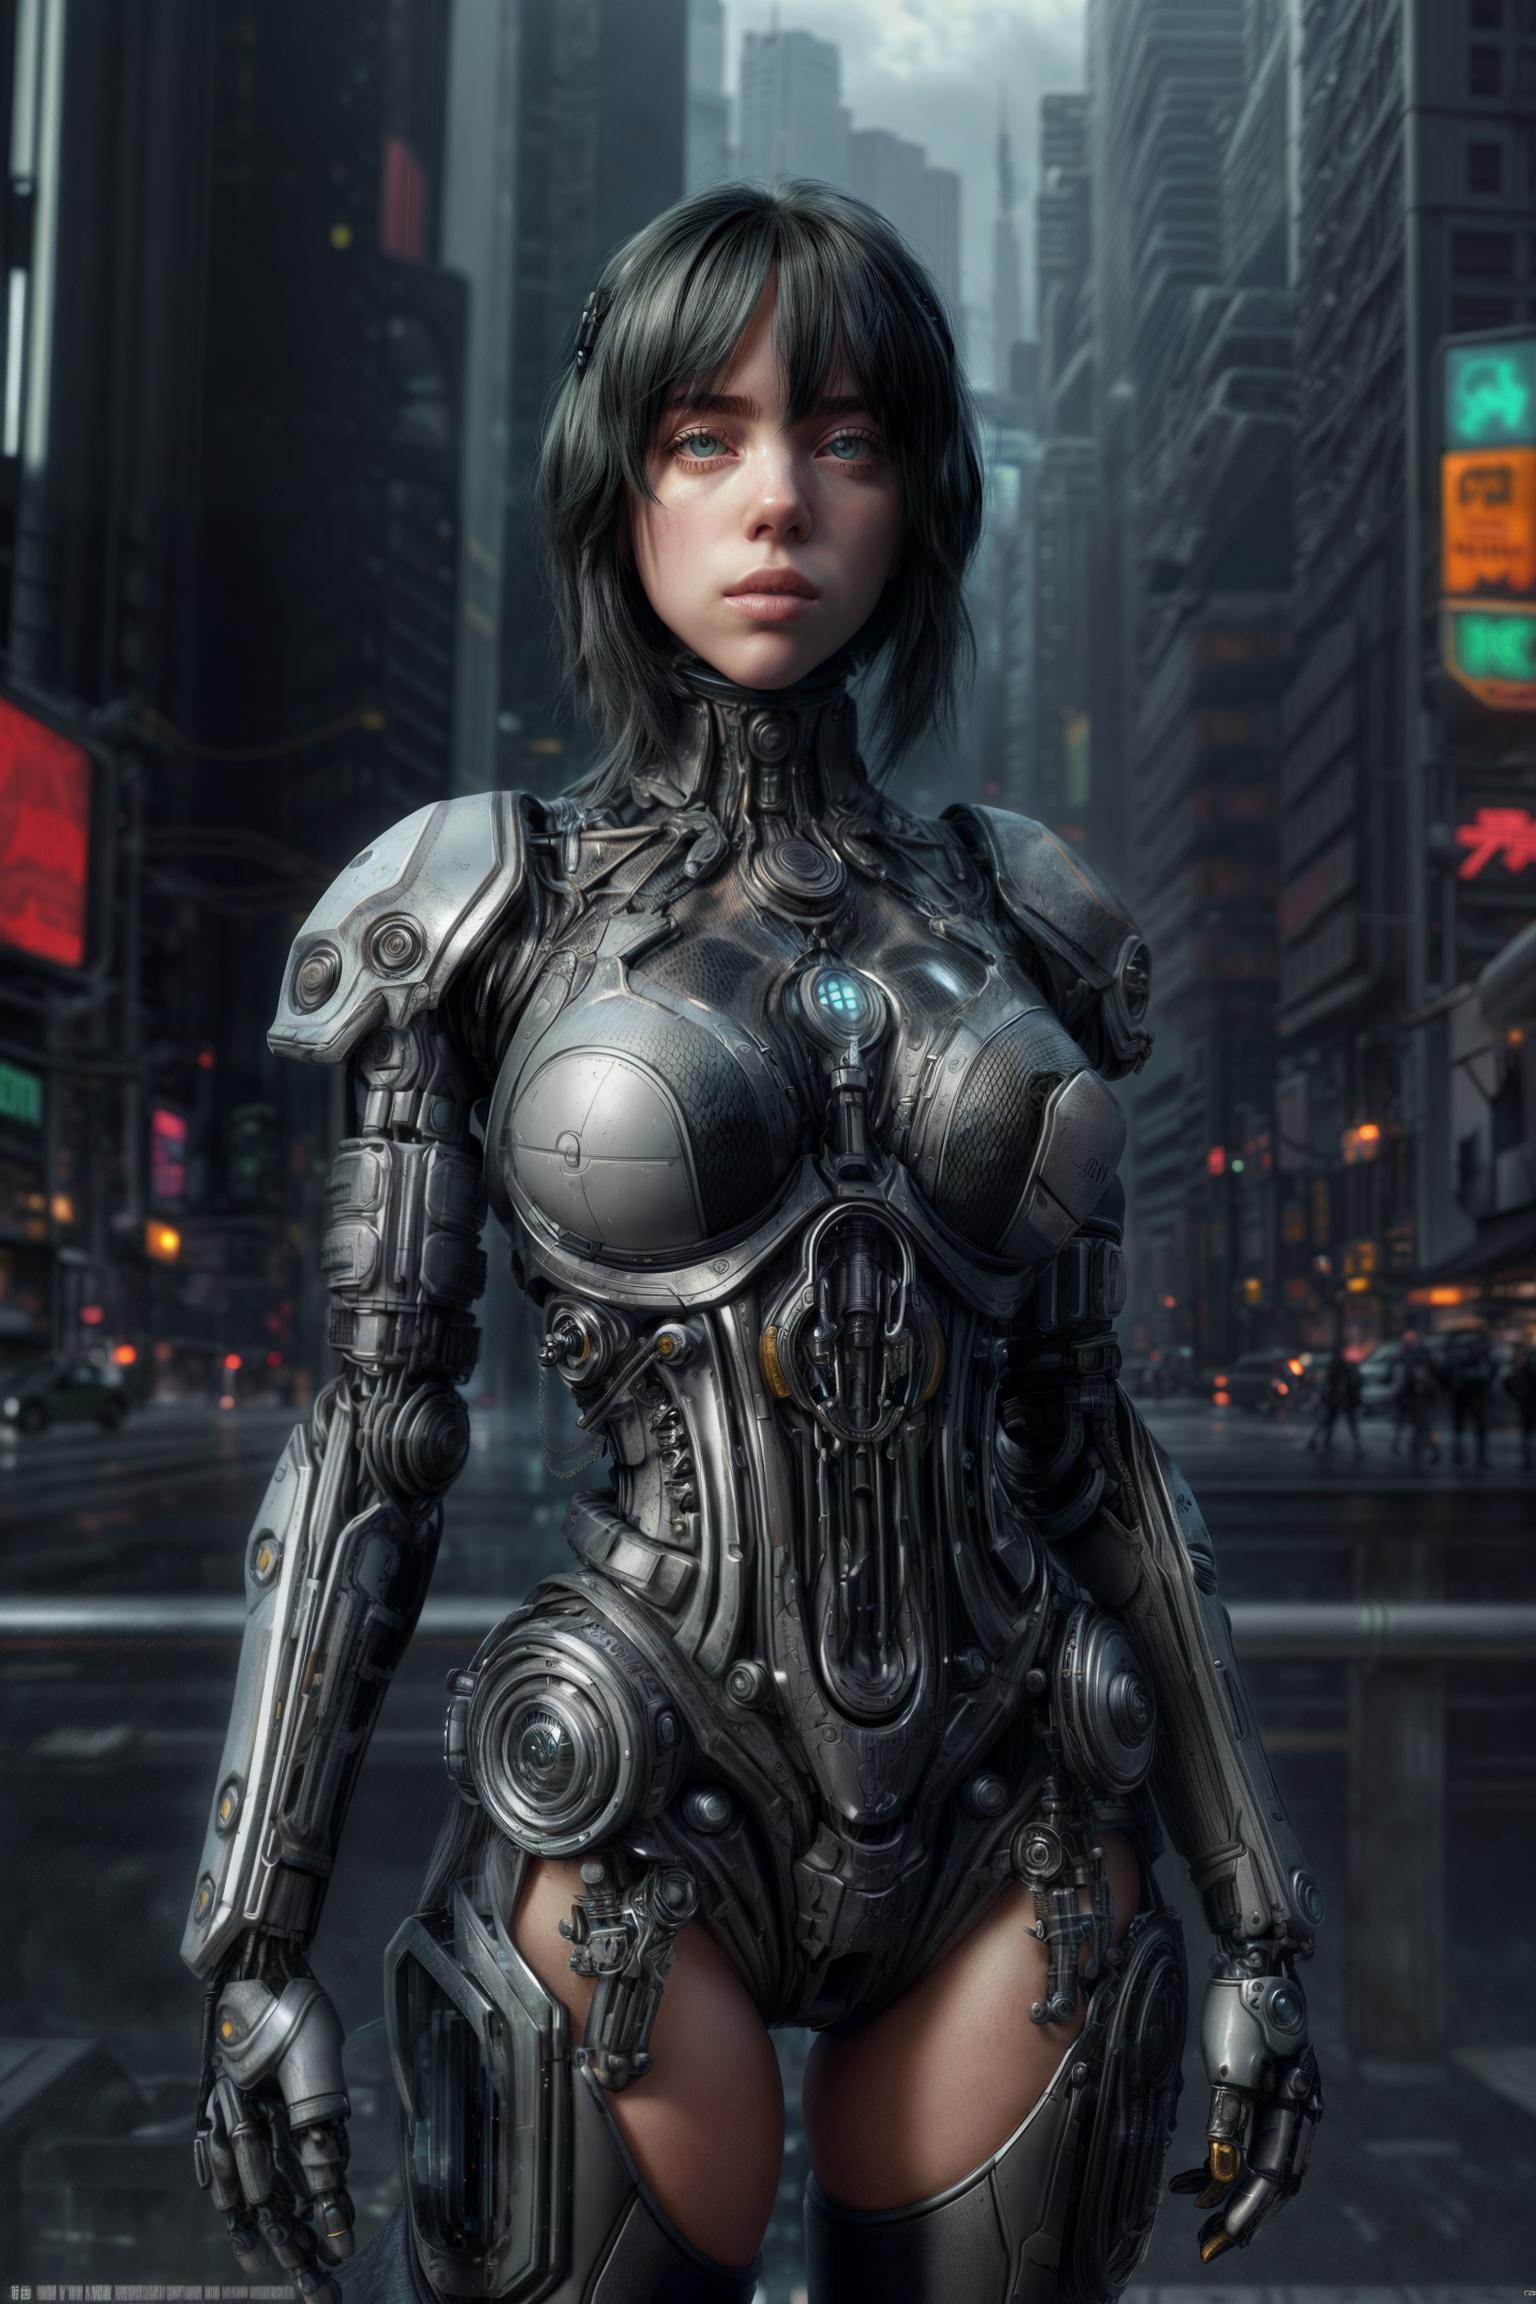 A futuristic robot woman standing in a city setting.